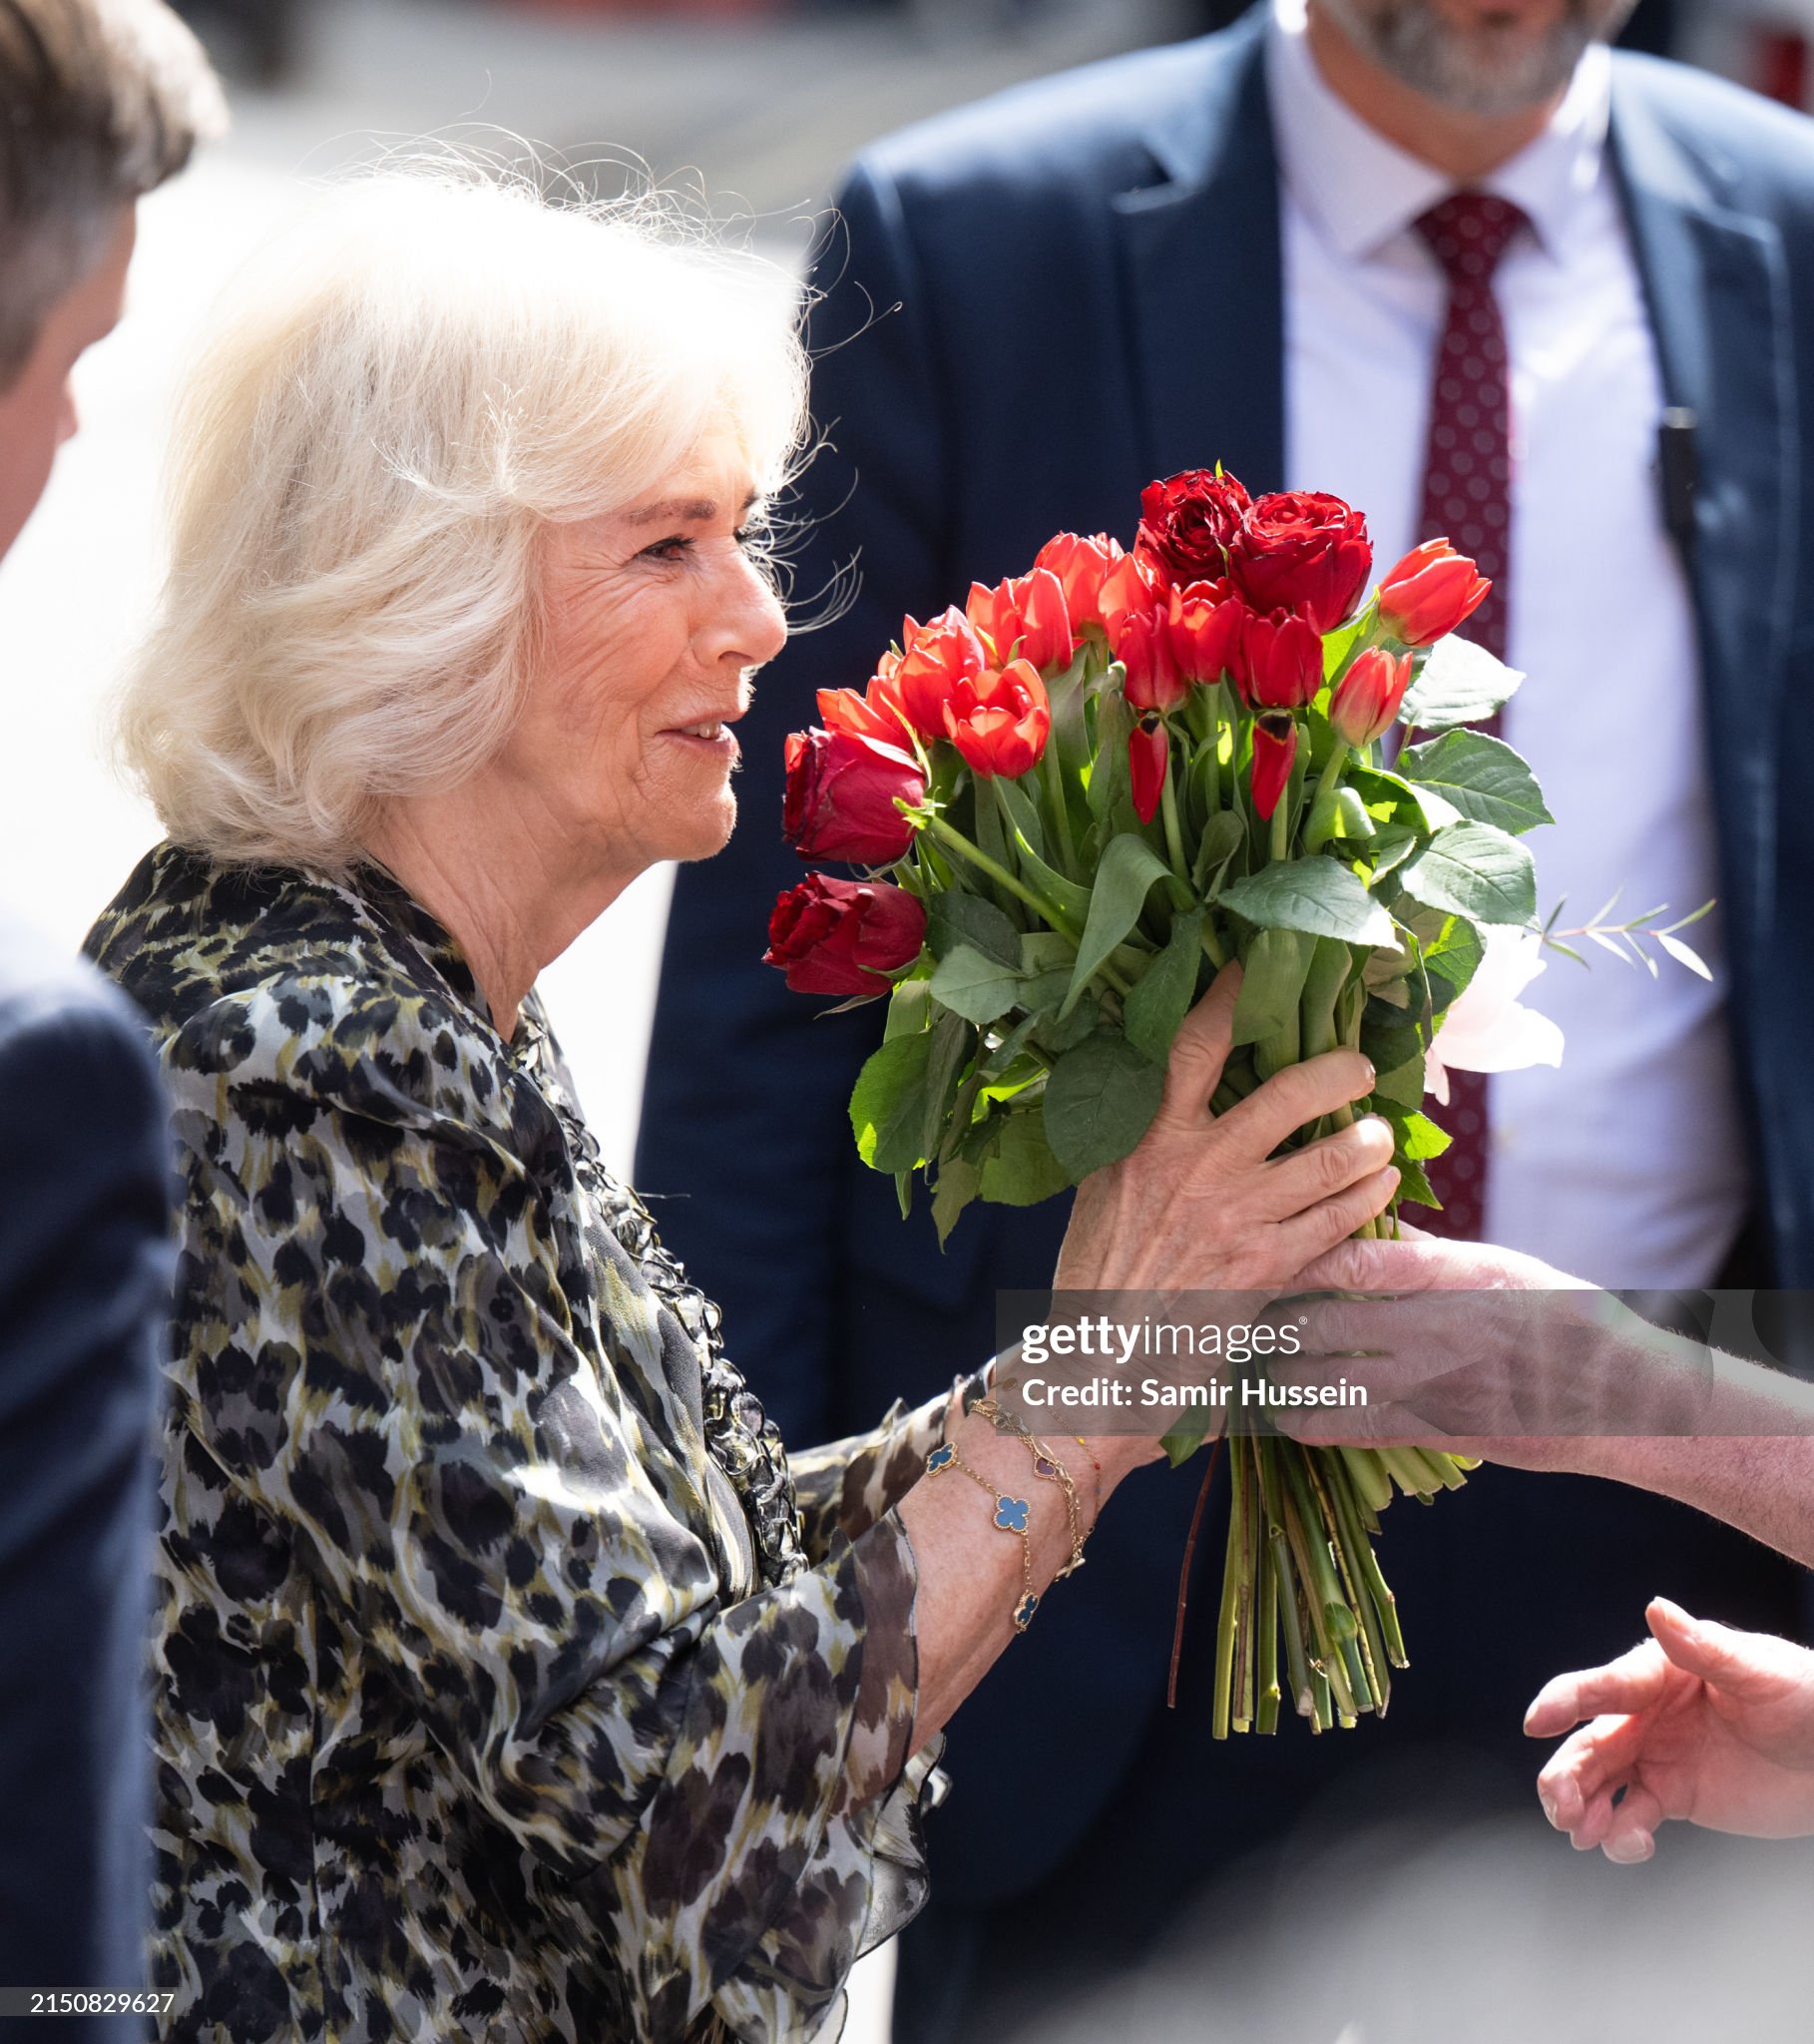 king-charles-iii-and-queen-camilla-visit-university-college-hospital-macmillan-cancer-centre.jpg?s=2048x2048&w=gi&k=20&c=h7AAxwbwJxYHKY7iQxnCMMTy5O9z5wuwwQVewQQWxqk=